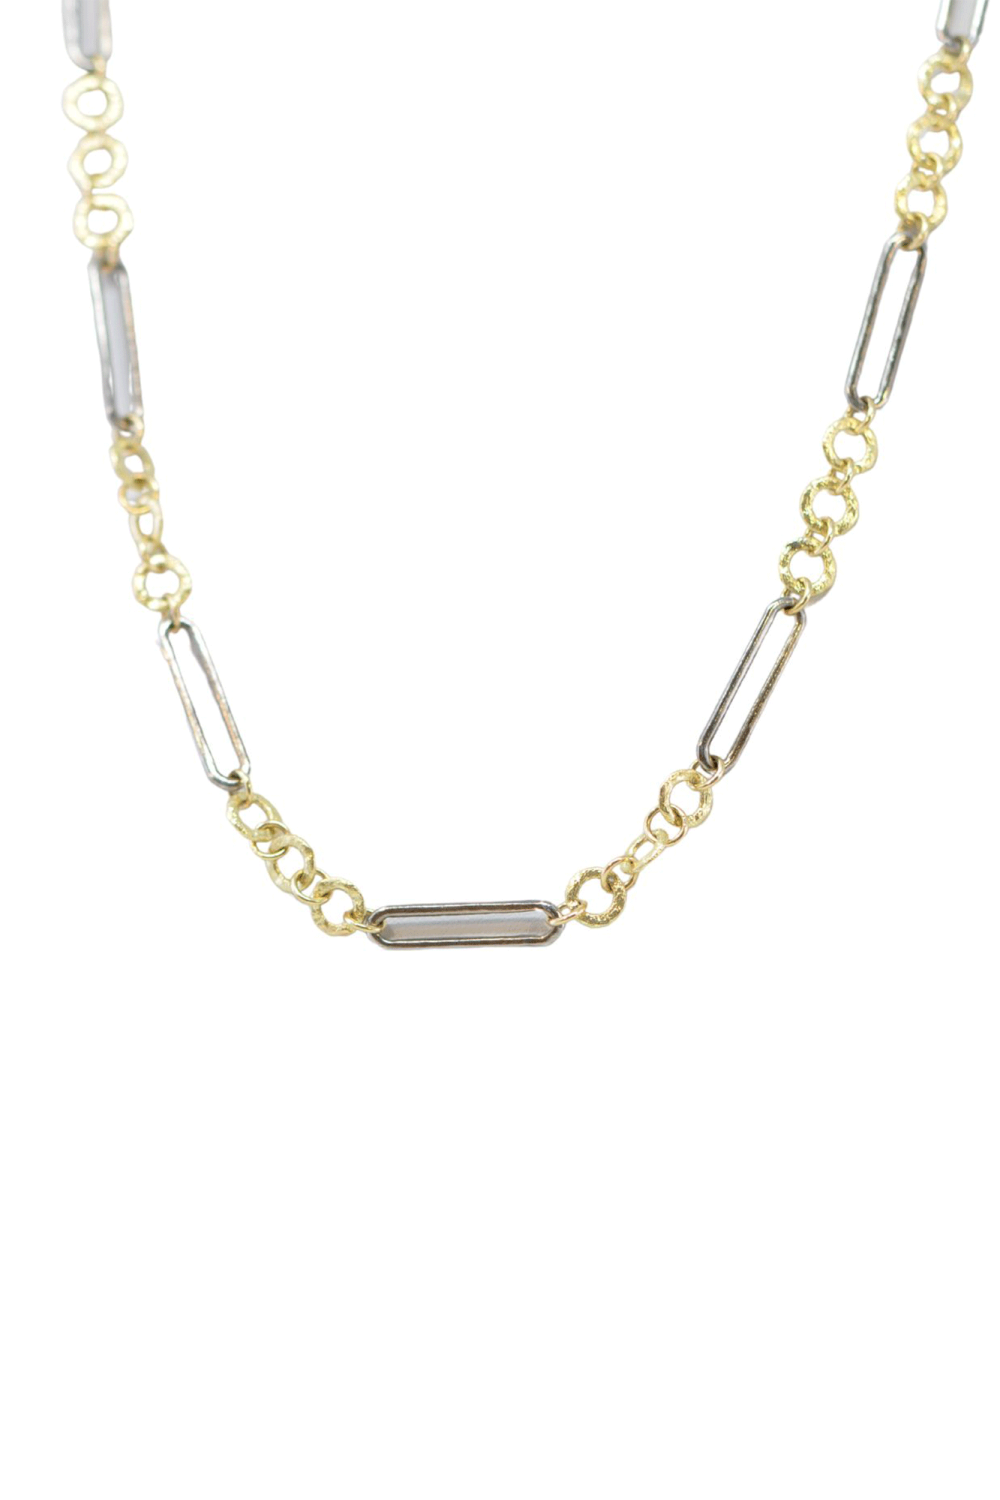 This elegant necklace from Armenta features paperclip-inspired links in 18k yellow gold and grey sterling silver. 